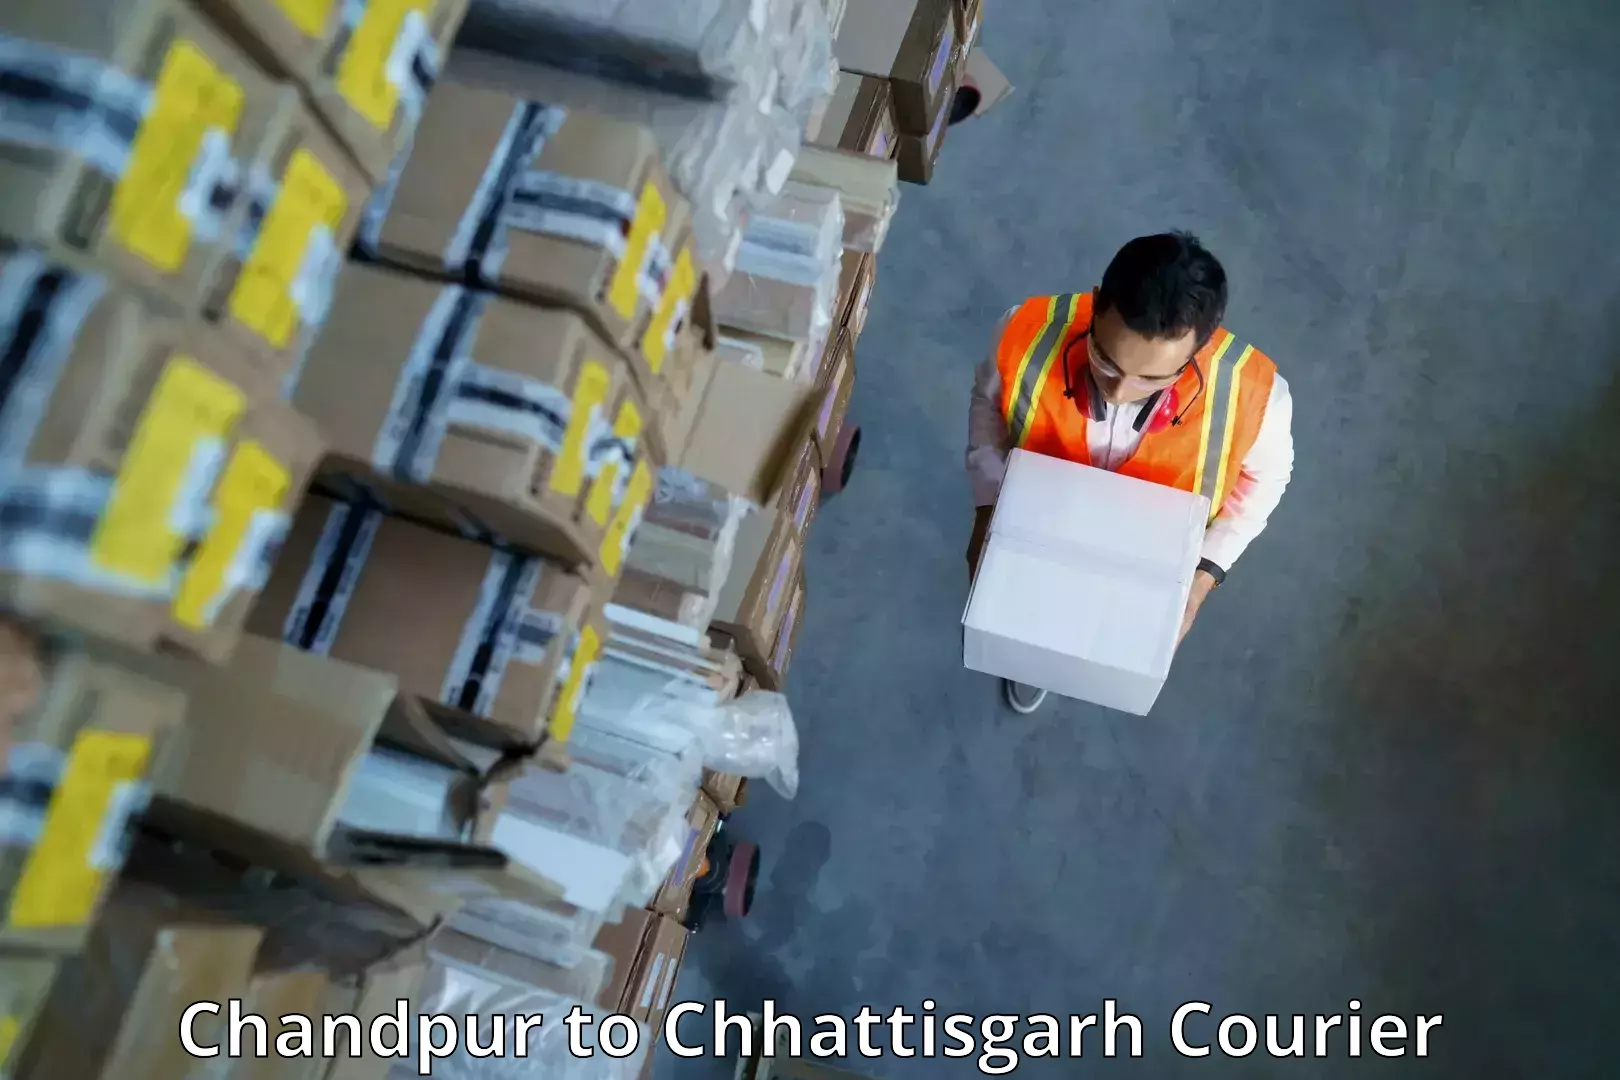 State-of-the-art courier technology Chandpur to Baloda Bazar